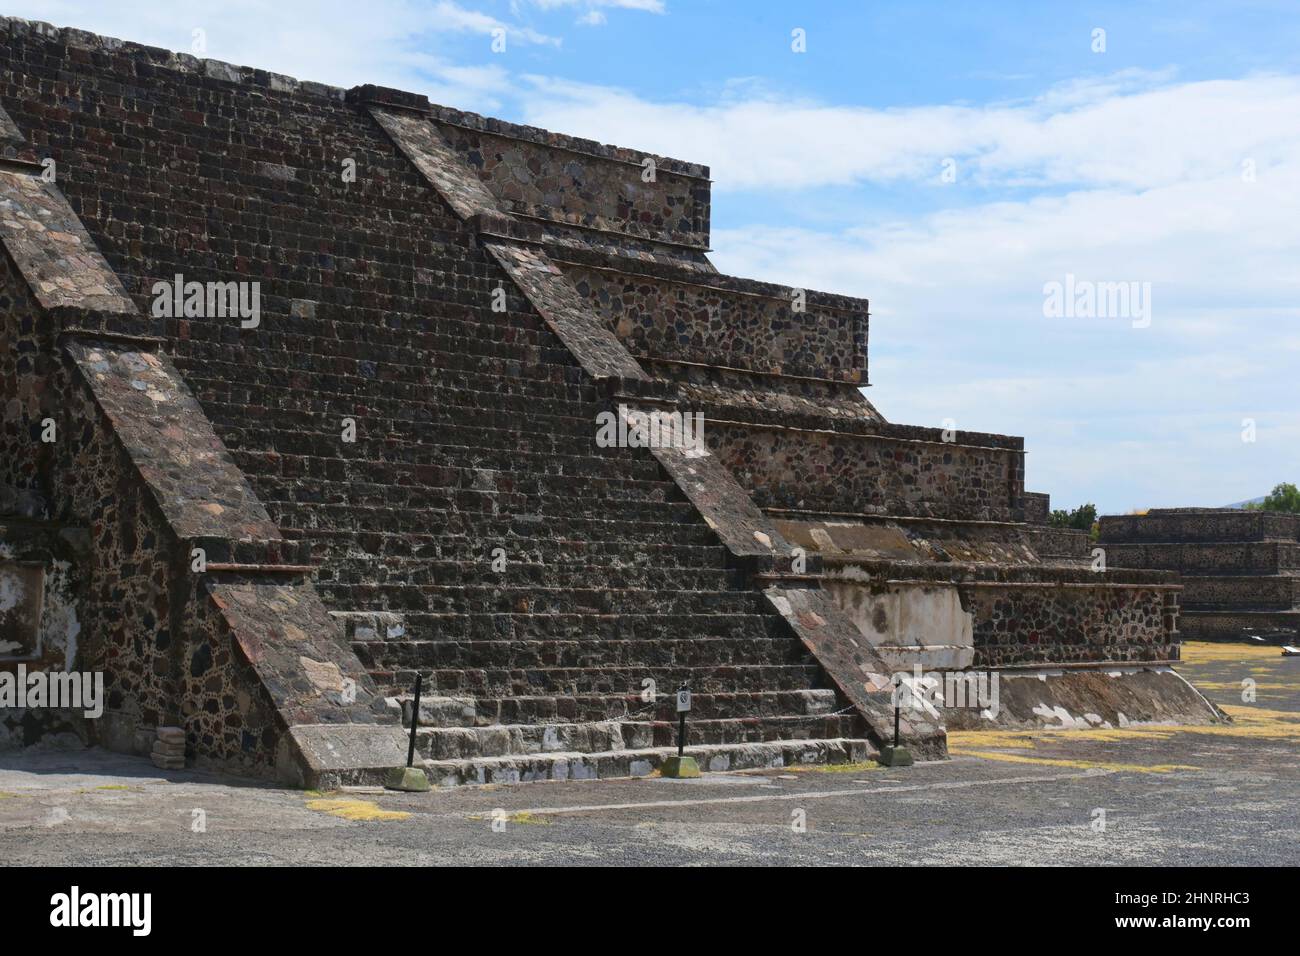 Pyramids of Teotihuacan, Mexico Archaeological Zone Stock Photo